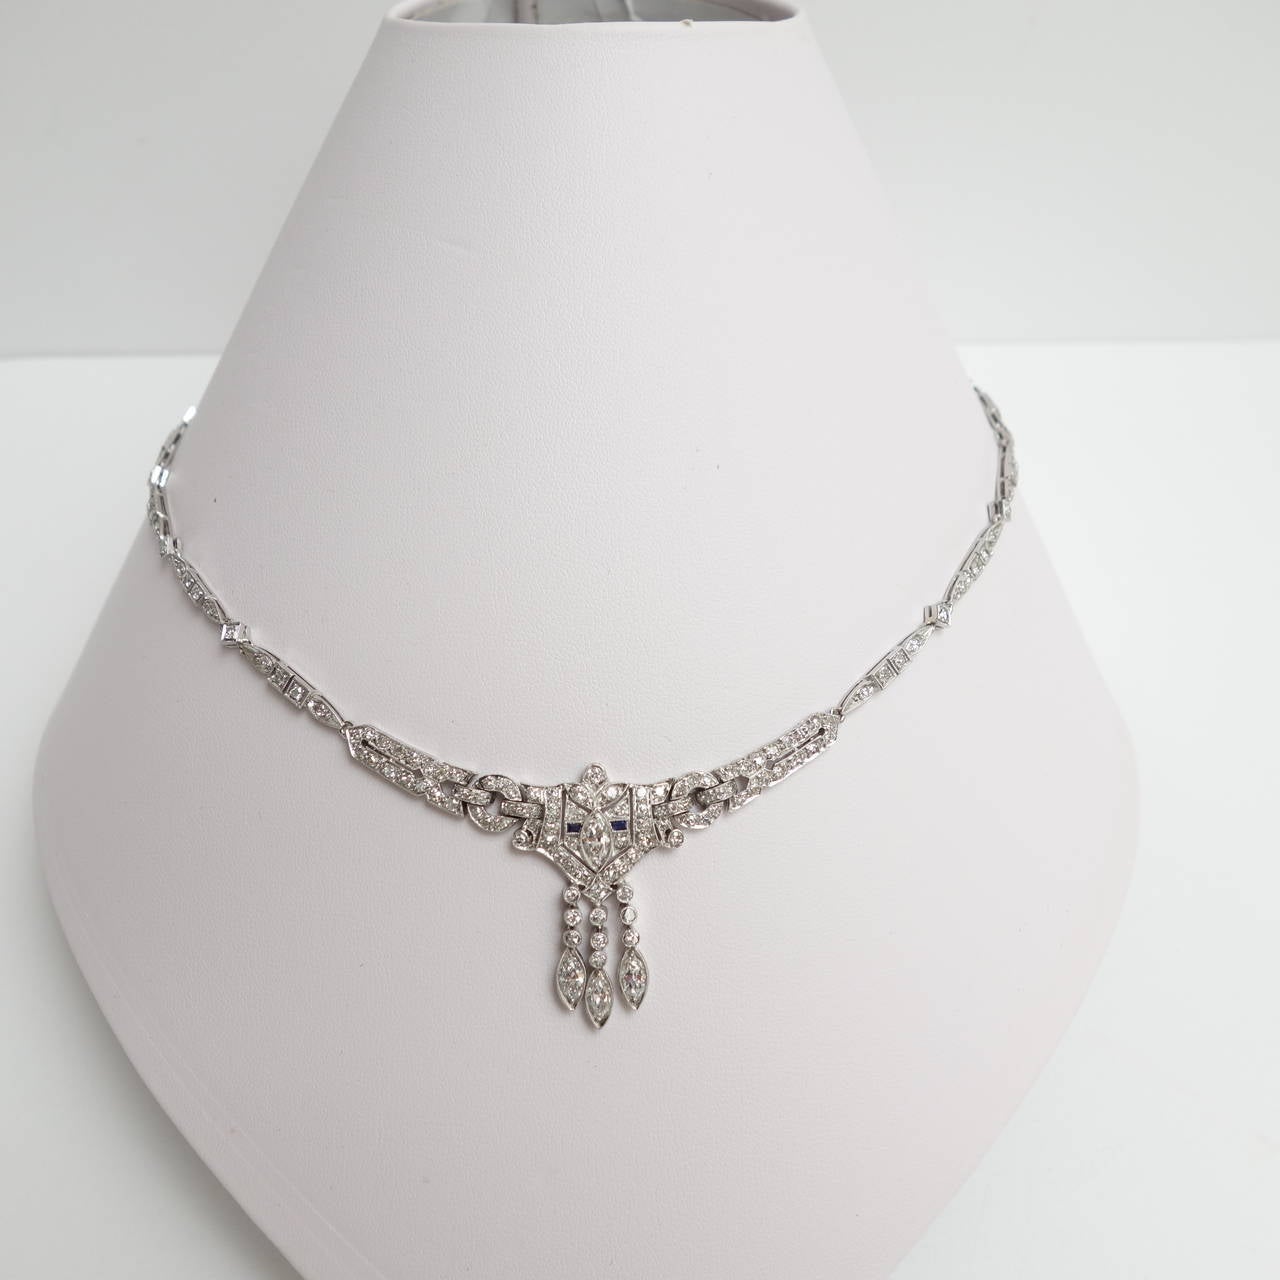 Classic elegant necklace from the Art Deco period, featuring  a diamond triple fringe center piece accented by blue sapphires,  supported by flexible diamond set links.  Total diamond weight is approximately 6.0 carats, color: G-H & H-I, clarity: